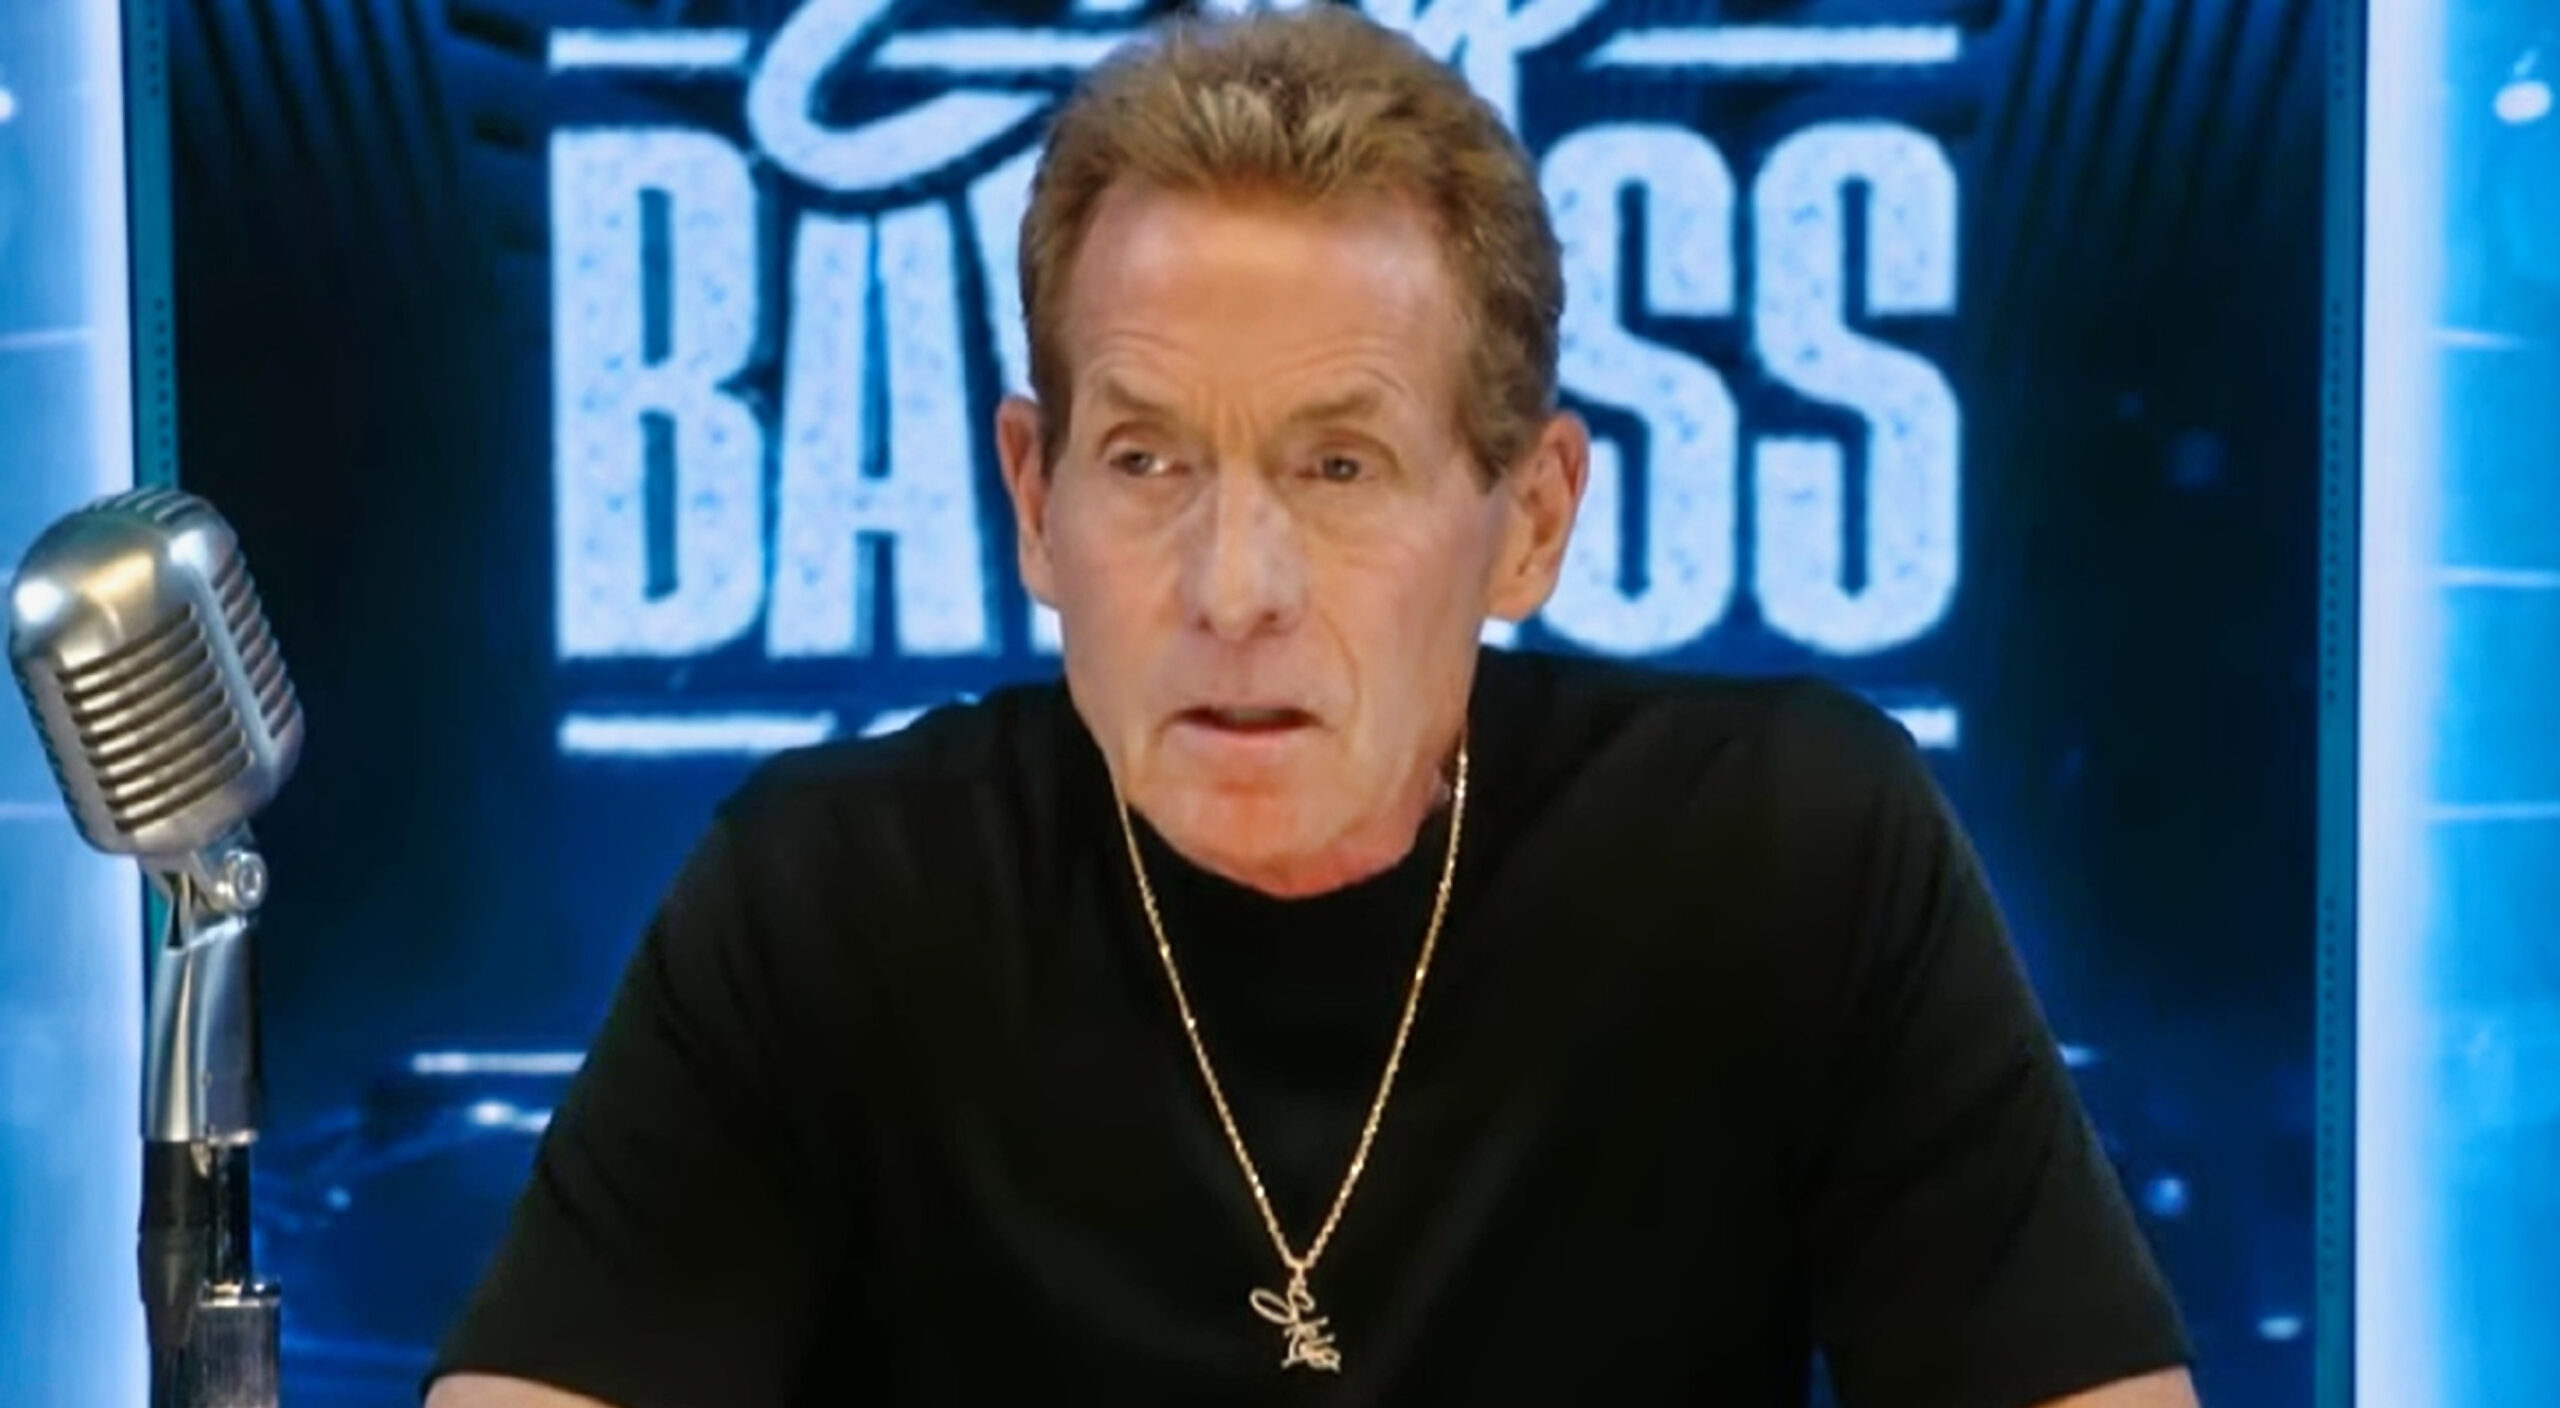 Skip Bayless Major Celebrity Will Appear Weekly On "Undisputed"